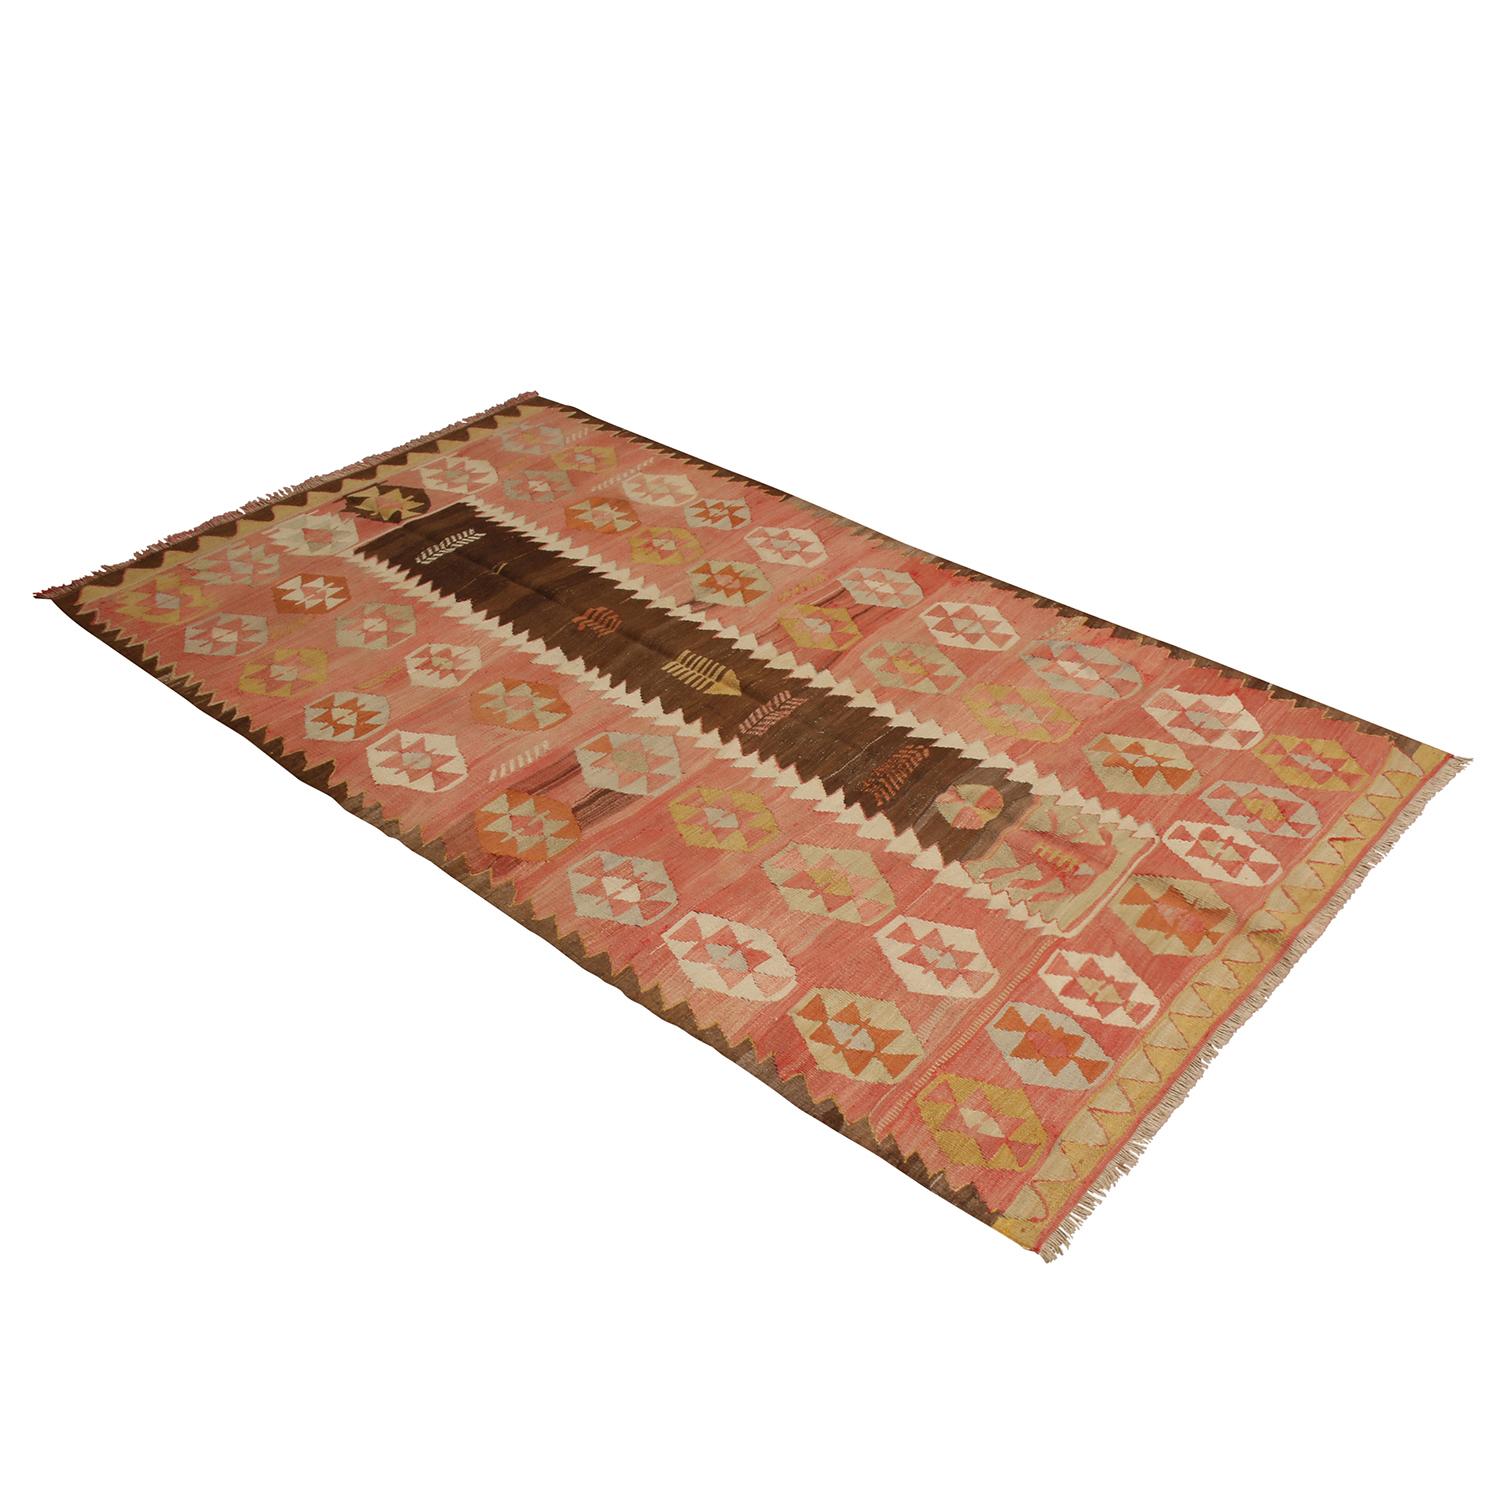 Hand-Woven Vintage Konya Salmon and Brown Wool Kilim Rug with Blue and Golden-Yellow Accent